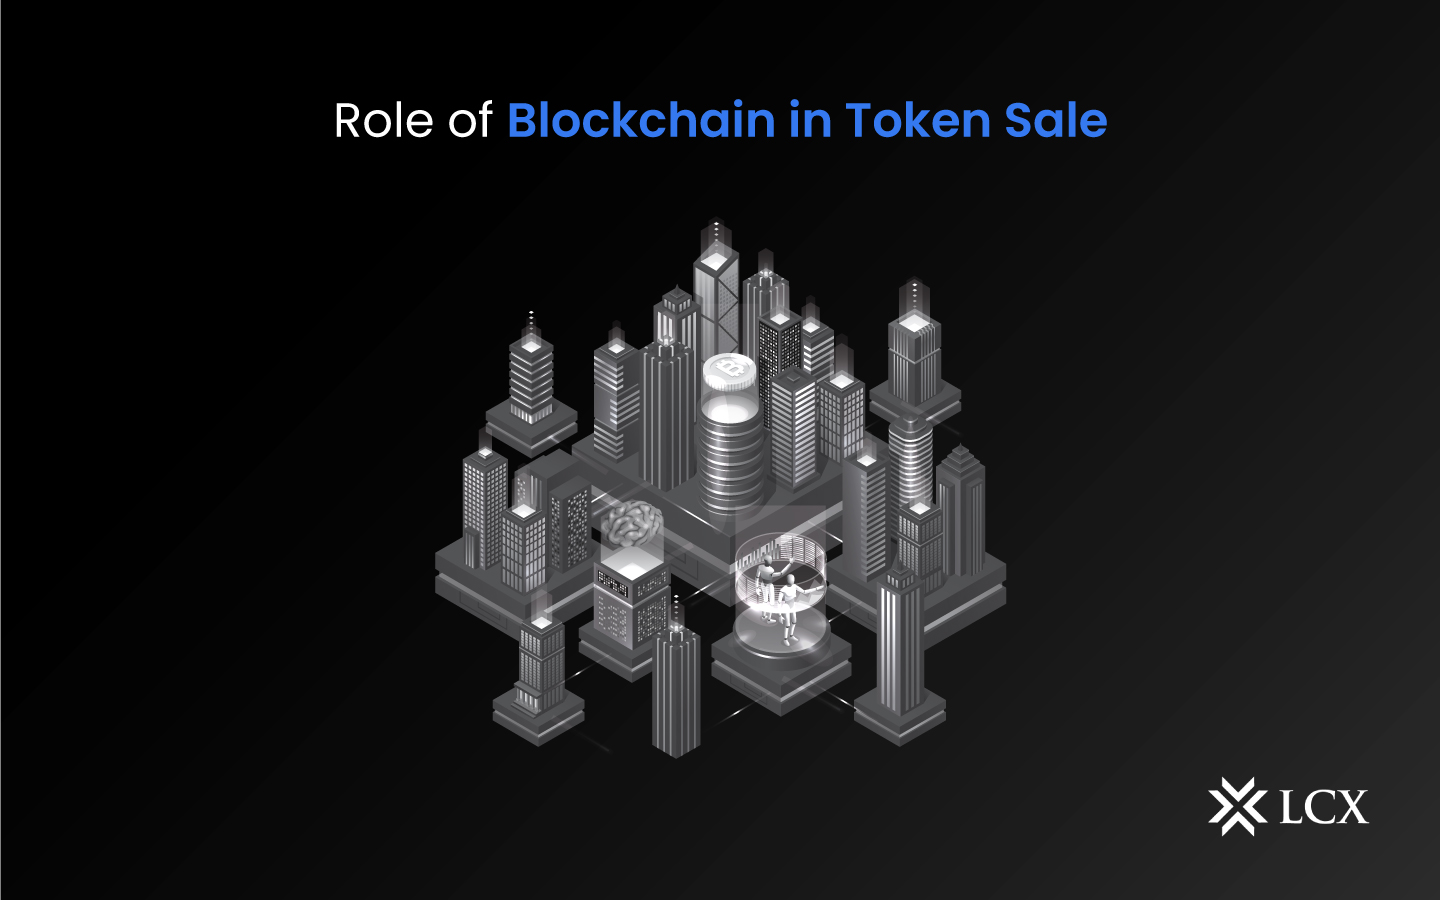 The role of blockchain technology in token sales